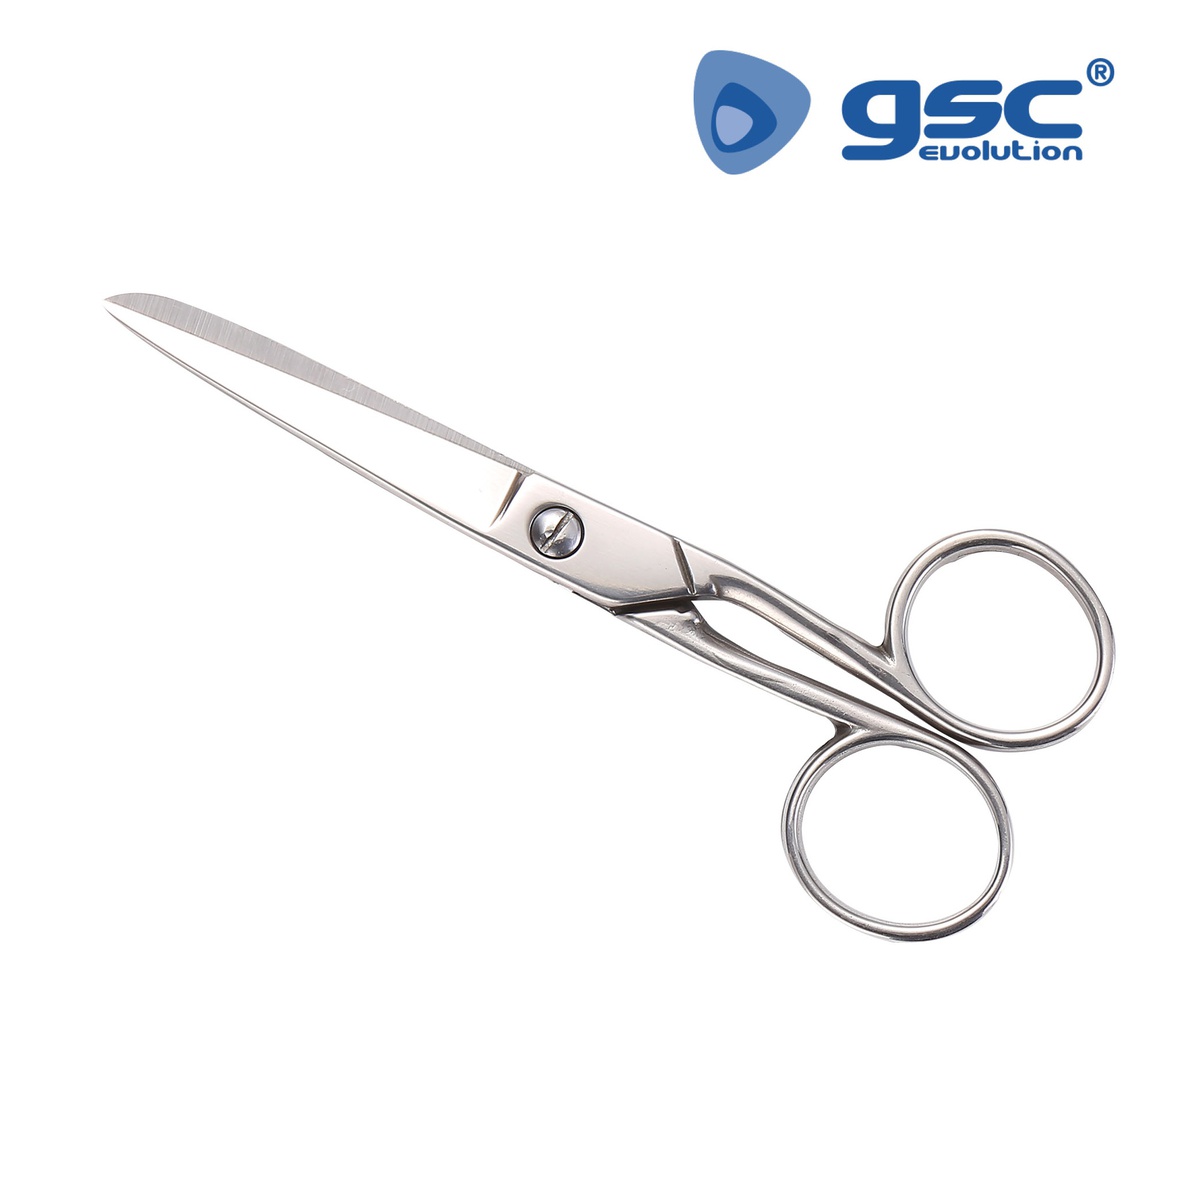 Stainless steel sewing scissors 5''